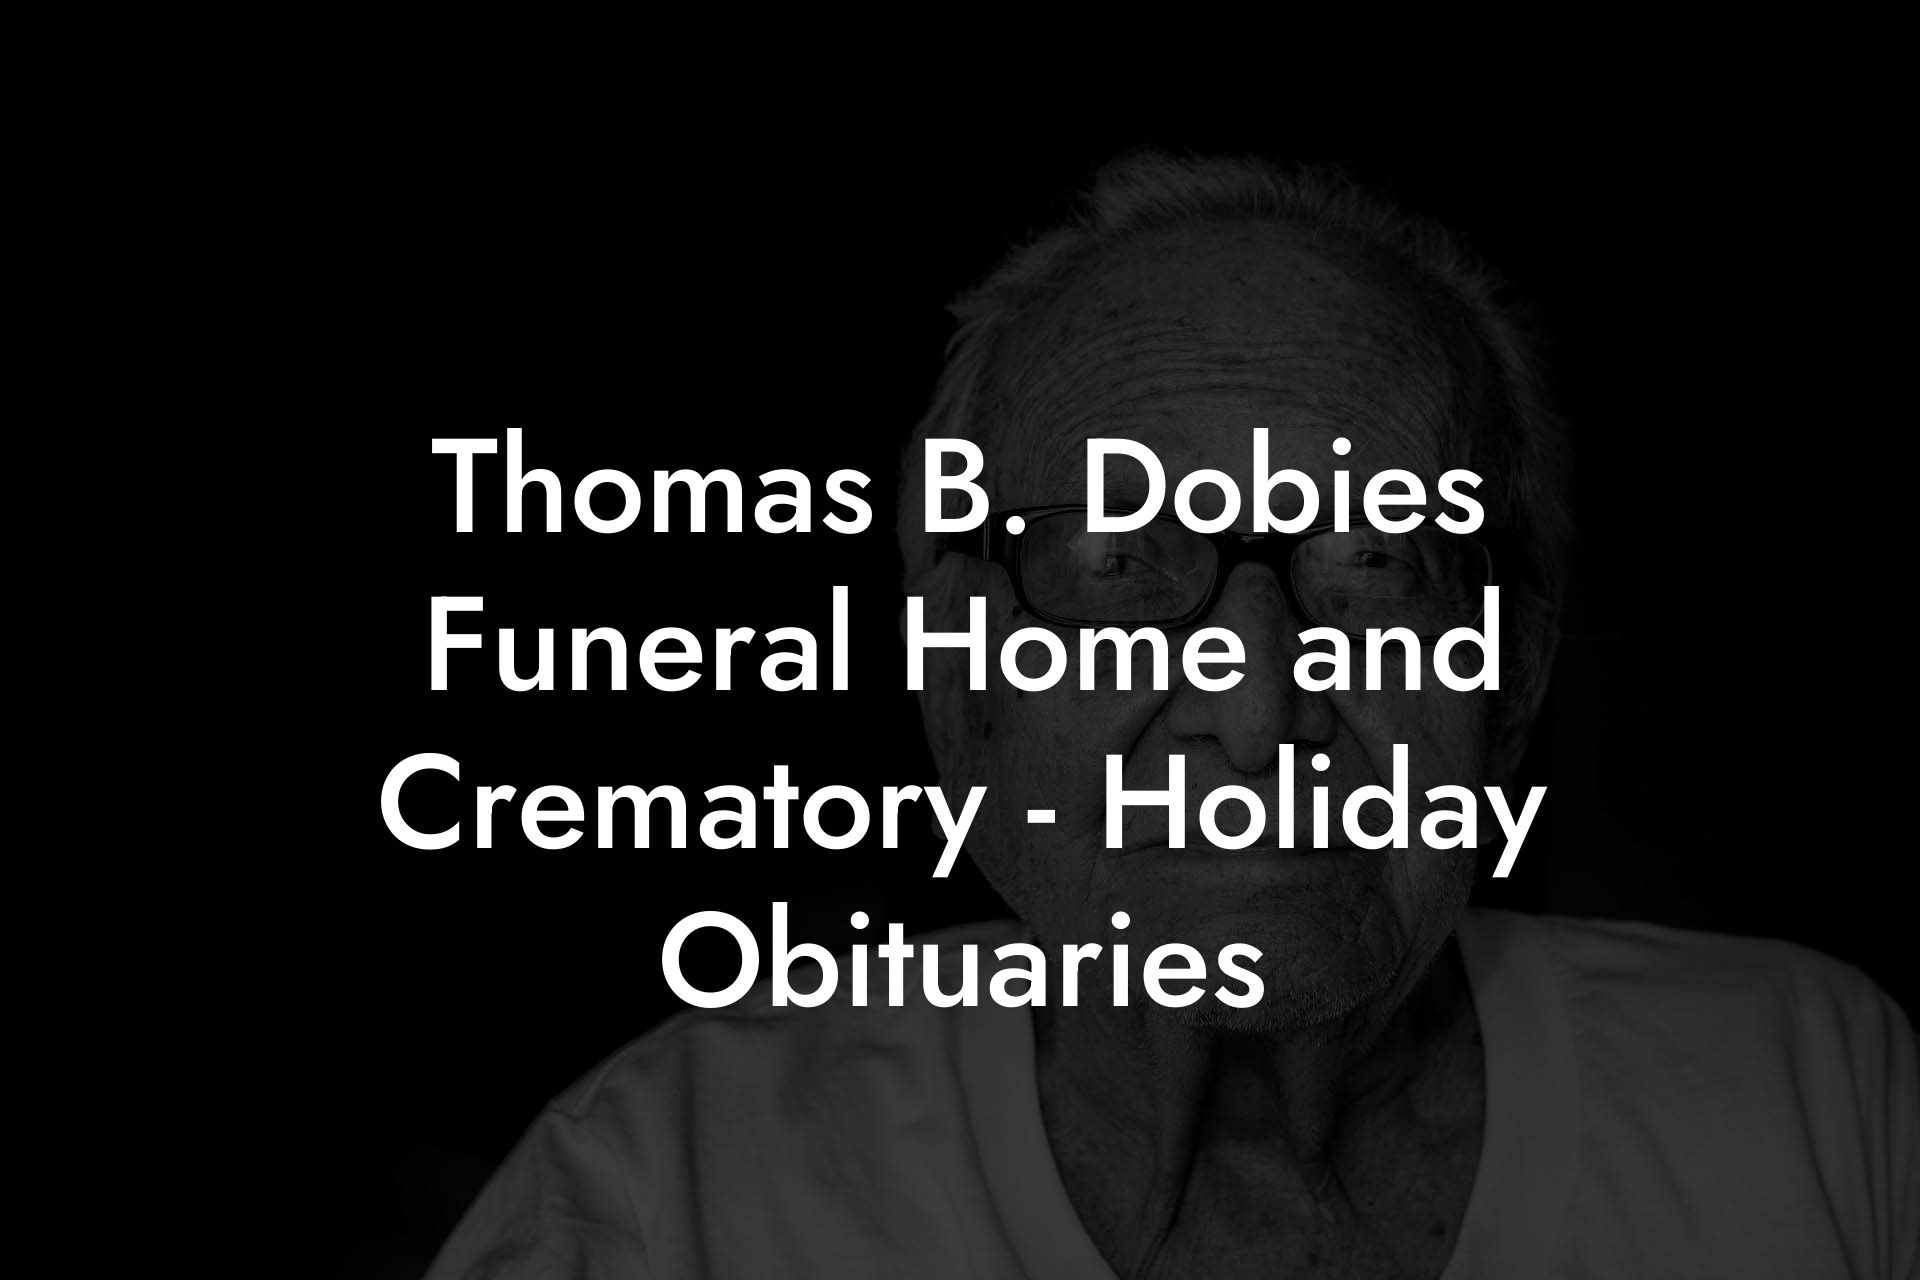 Thomas B. Dobies Funeral Home and Crematory - Holiday Obituaries